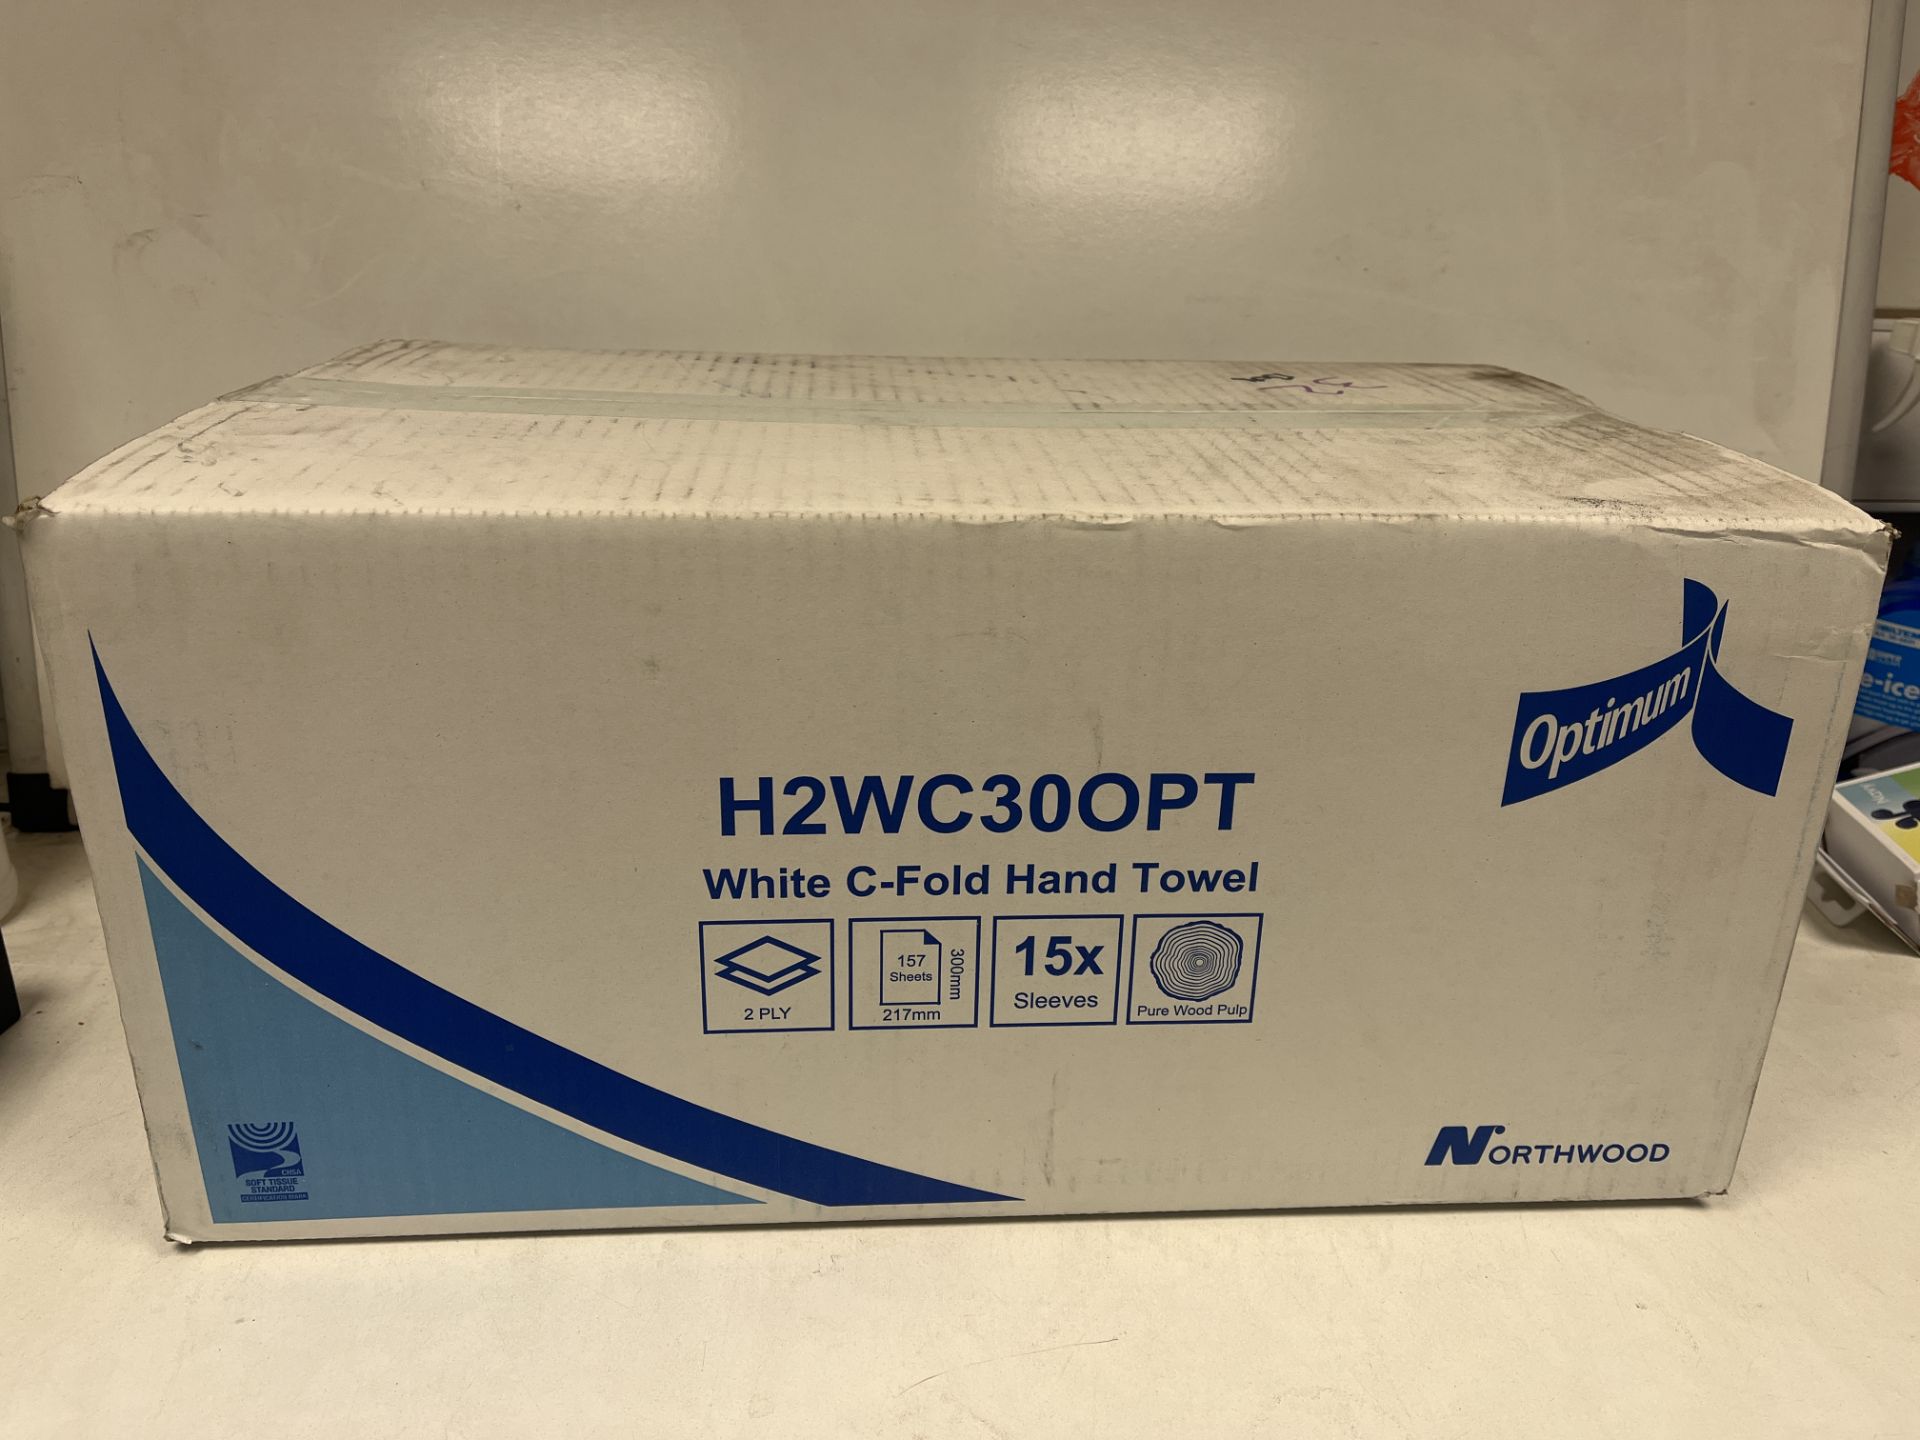 7 X NEW BOXES OF NORTHWOOD OPTIMUM WHITE C-FOLD HAND TOWELS. EACH BOX CONTAINS 15 SLEEVES OF 157